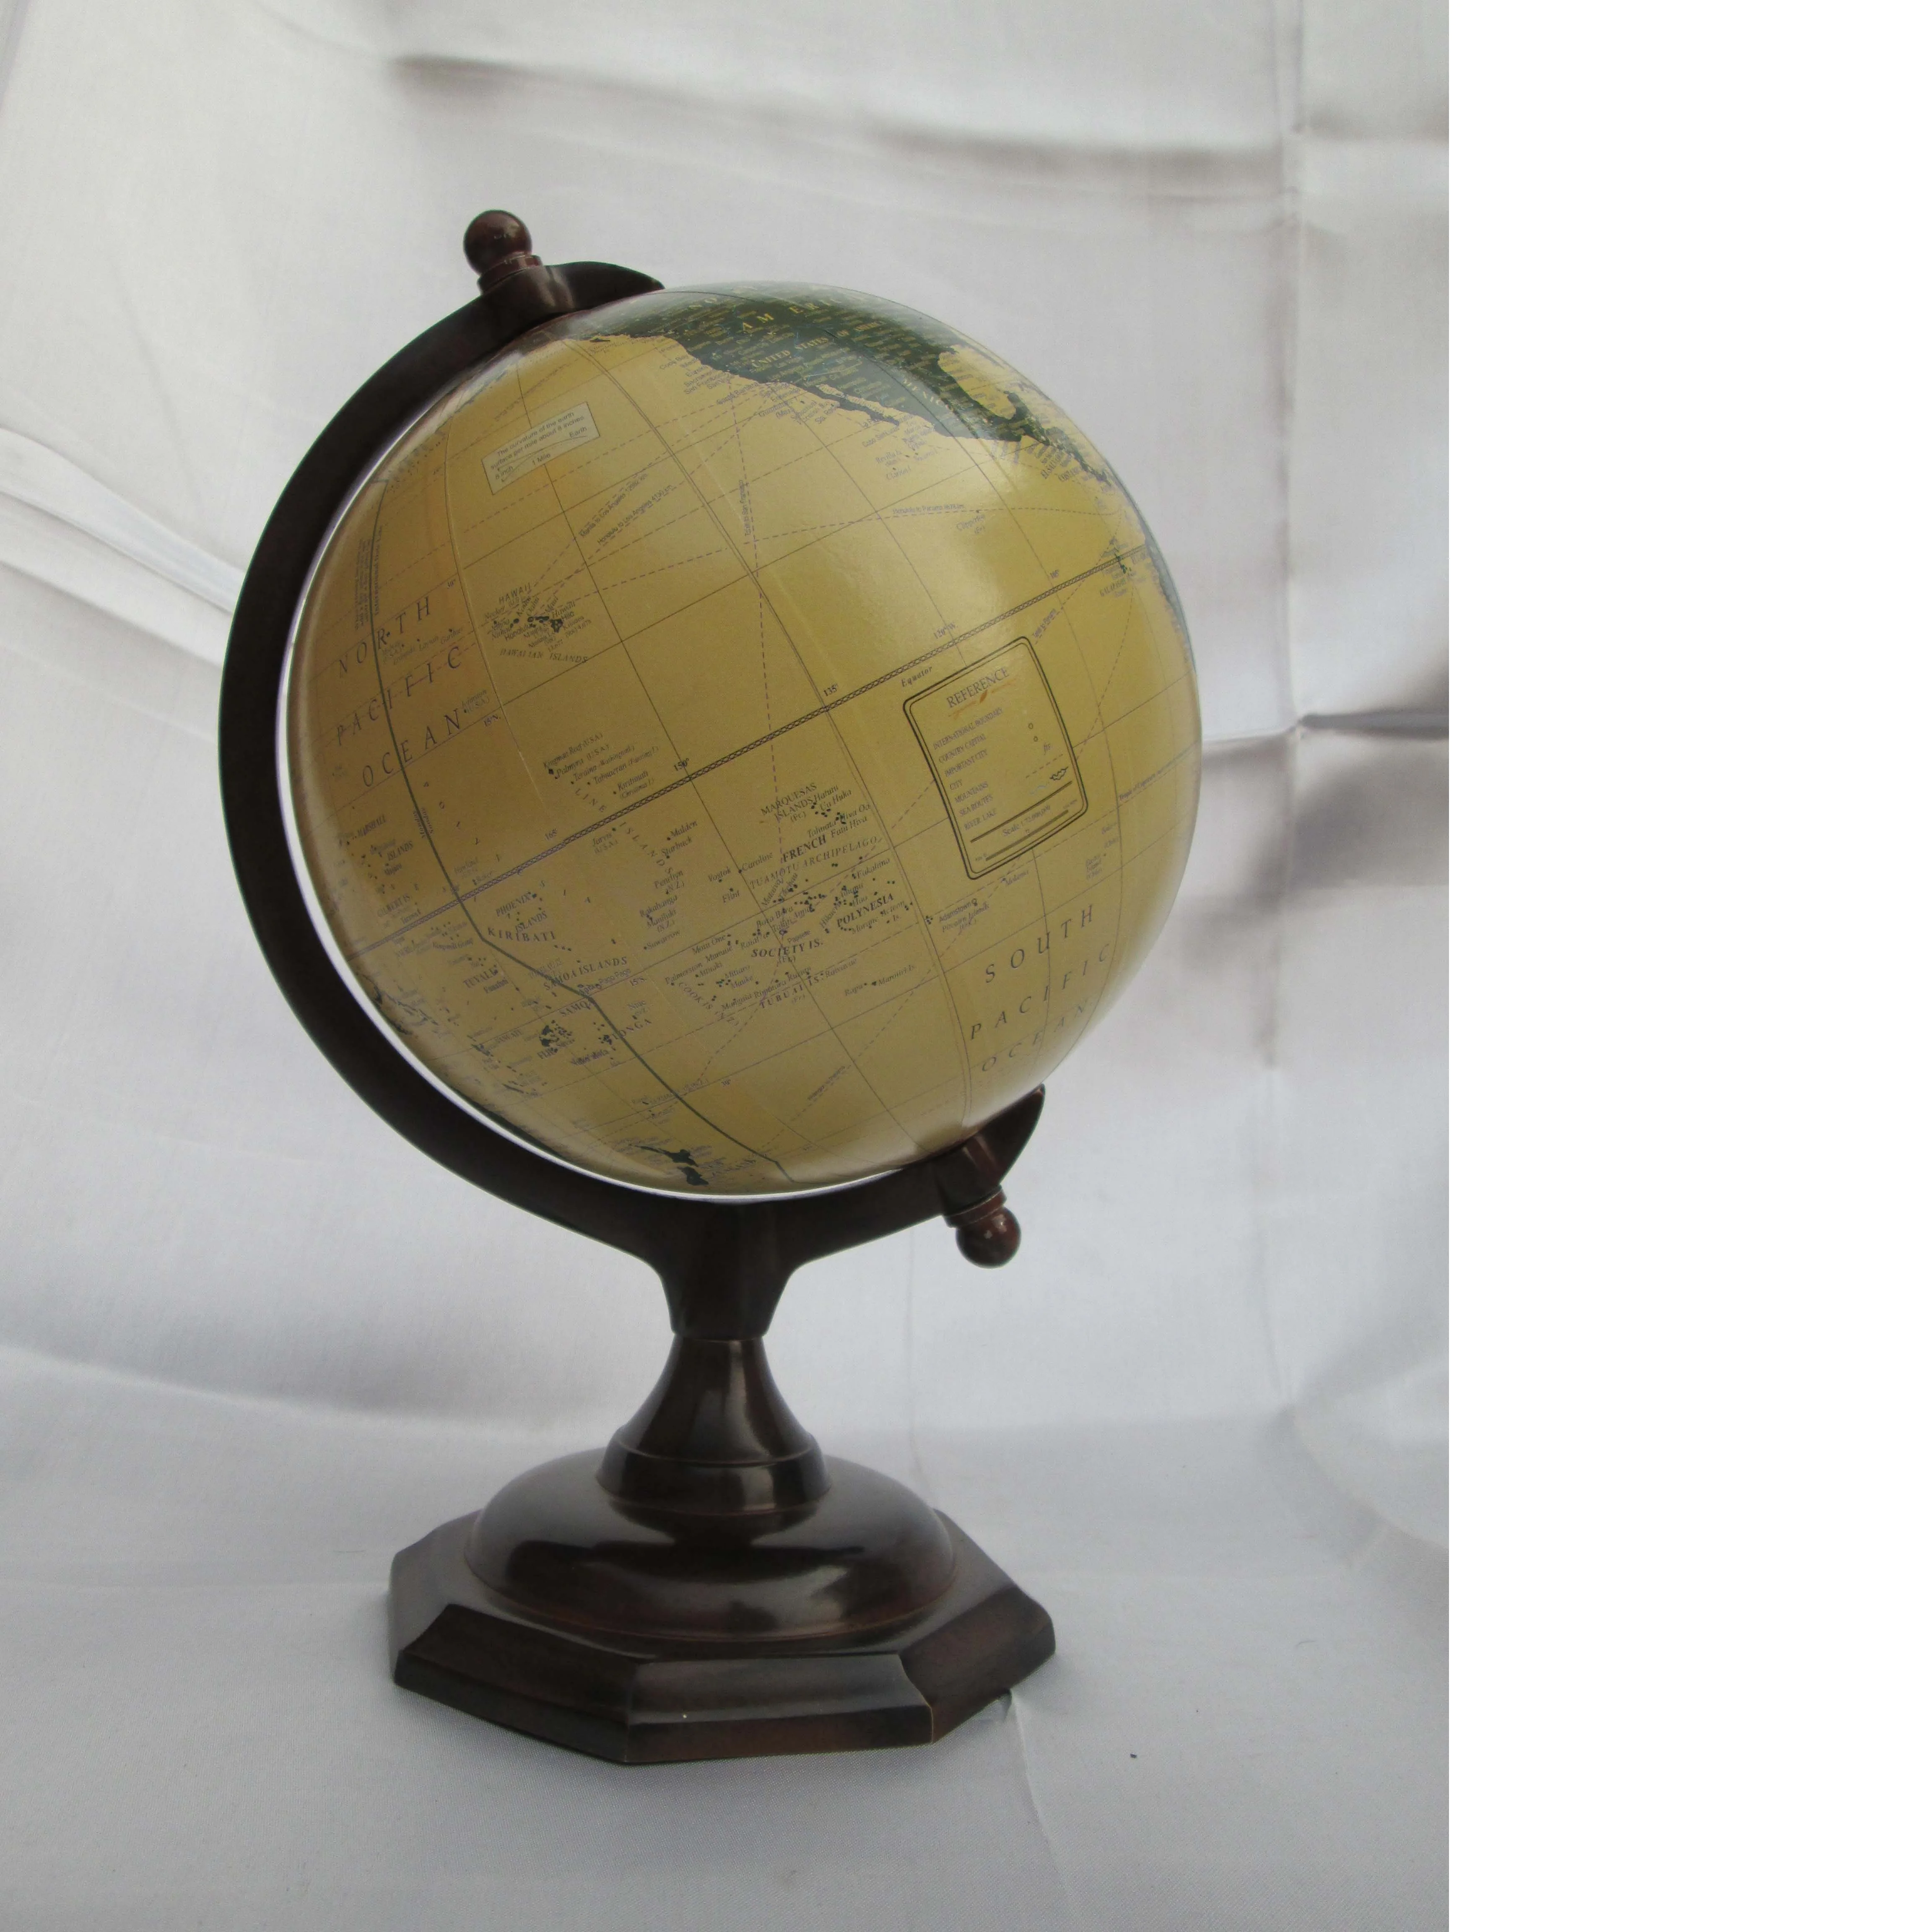 Antique Desk Globe With Sea Route Air Route And World Major Cities